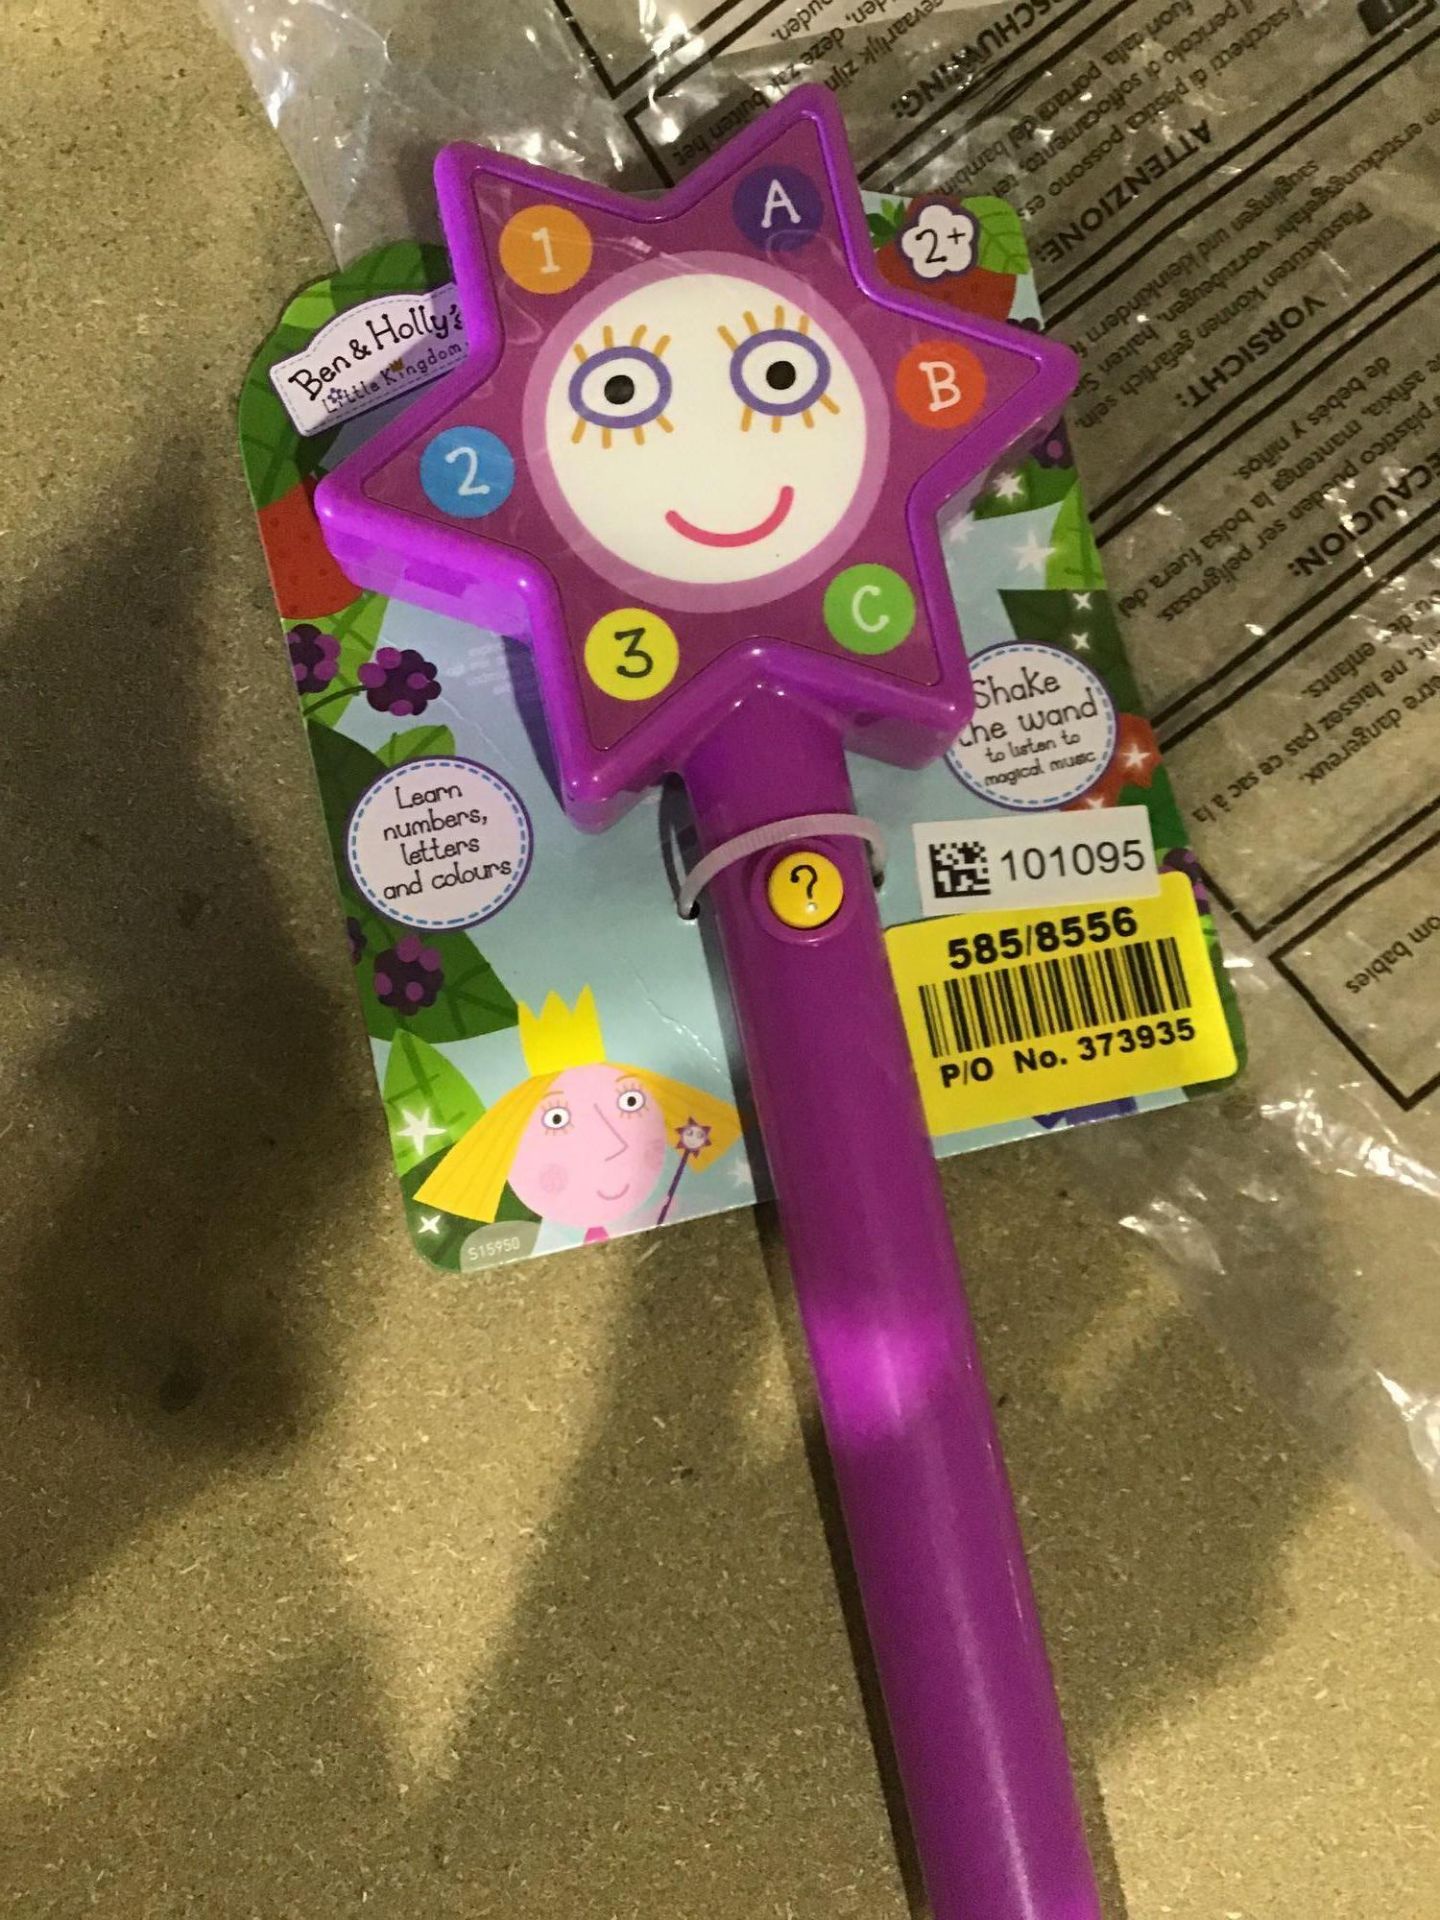 Ben and Holly's Little Kingdom Magical Wand (585/8556) - £11.00 RRP - Image 2 of 4